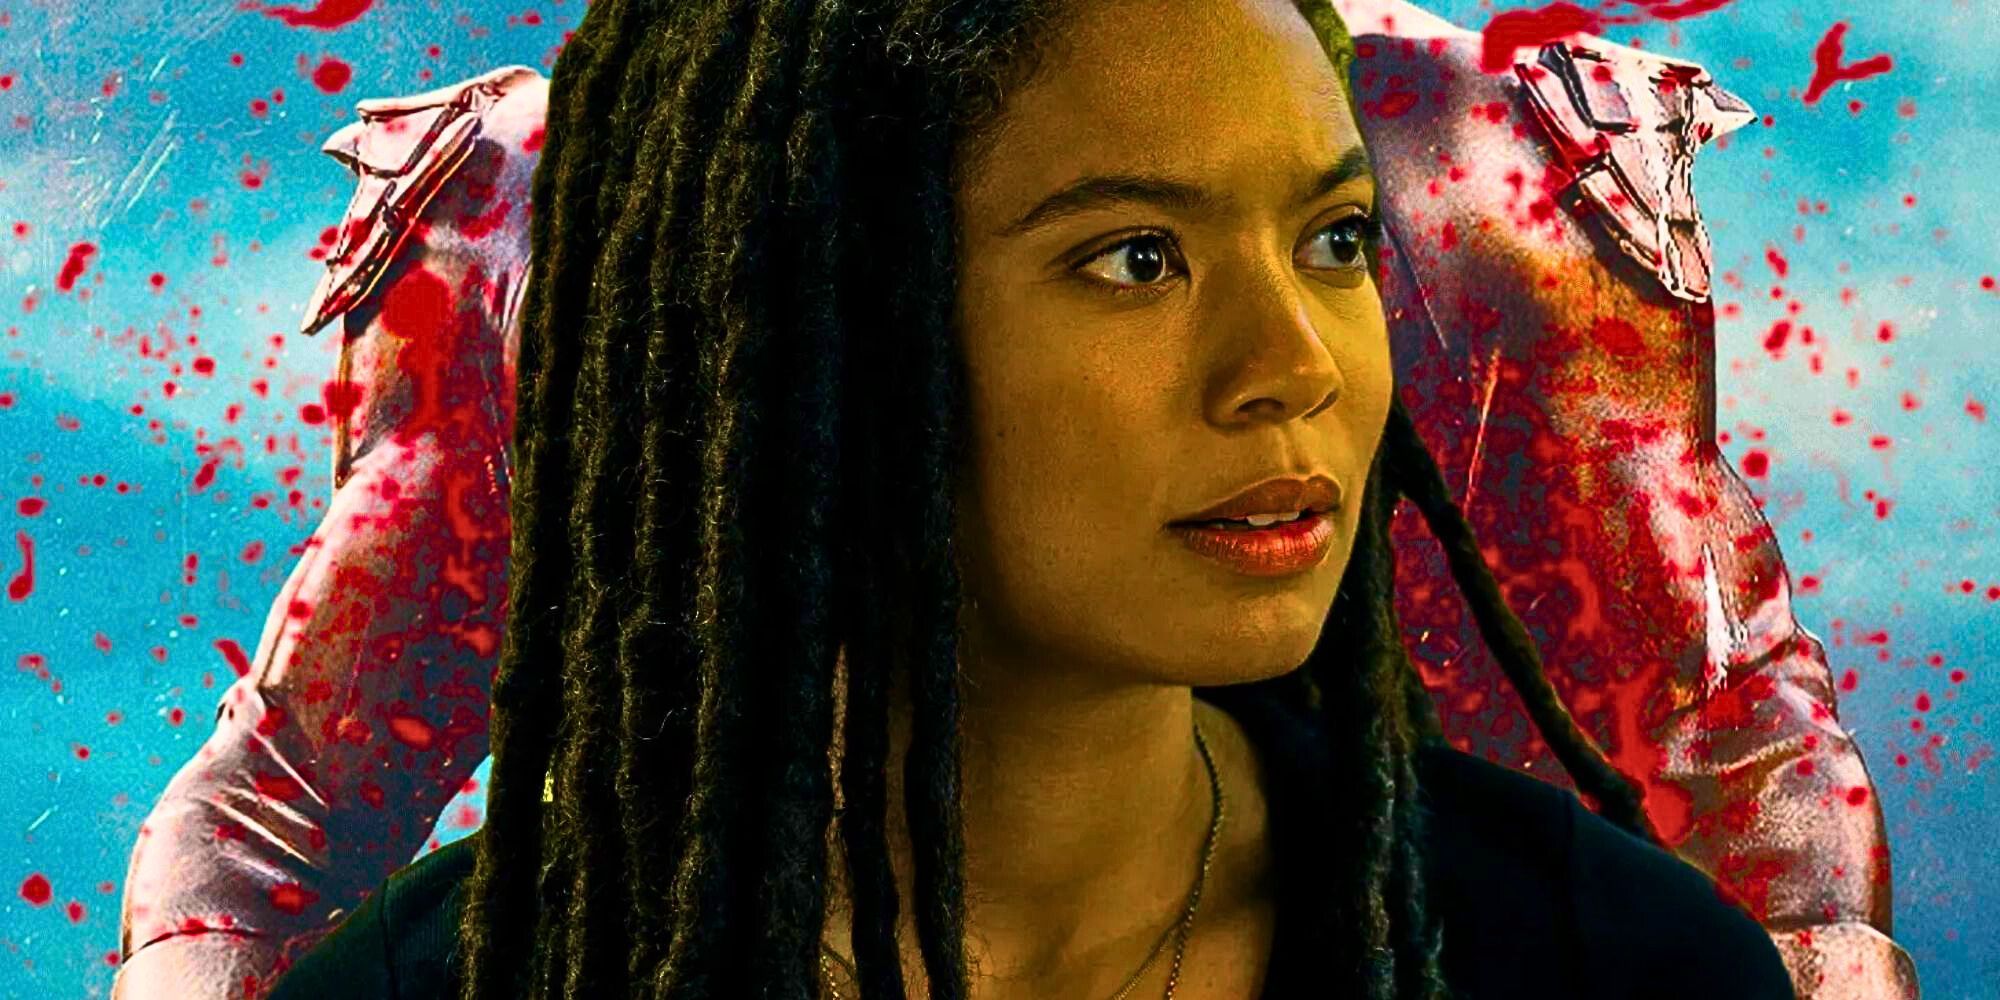 A custom image of Jaz Sinclair as Marie Moreau with blood splattered behind her